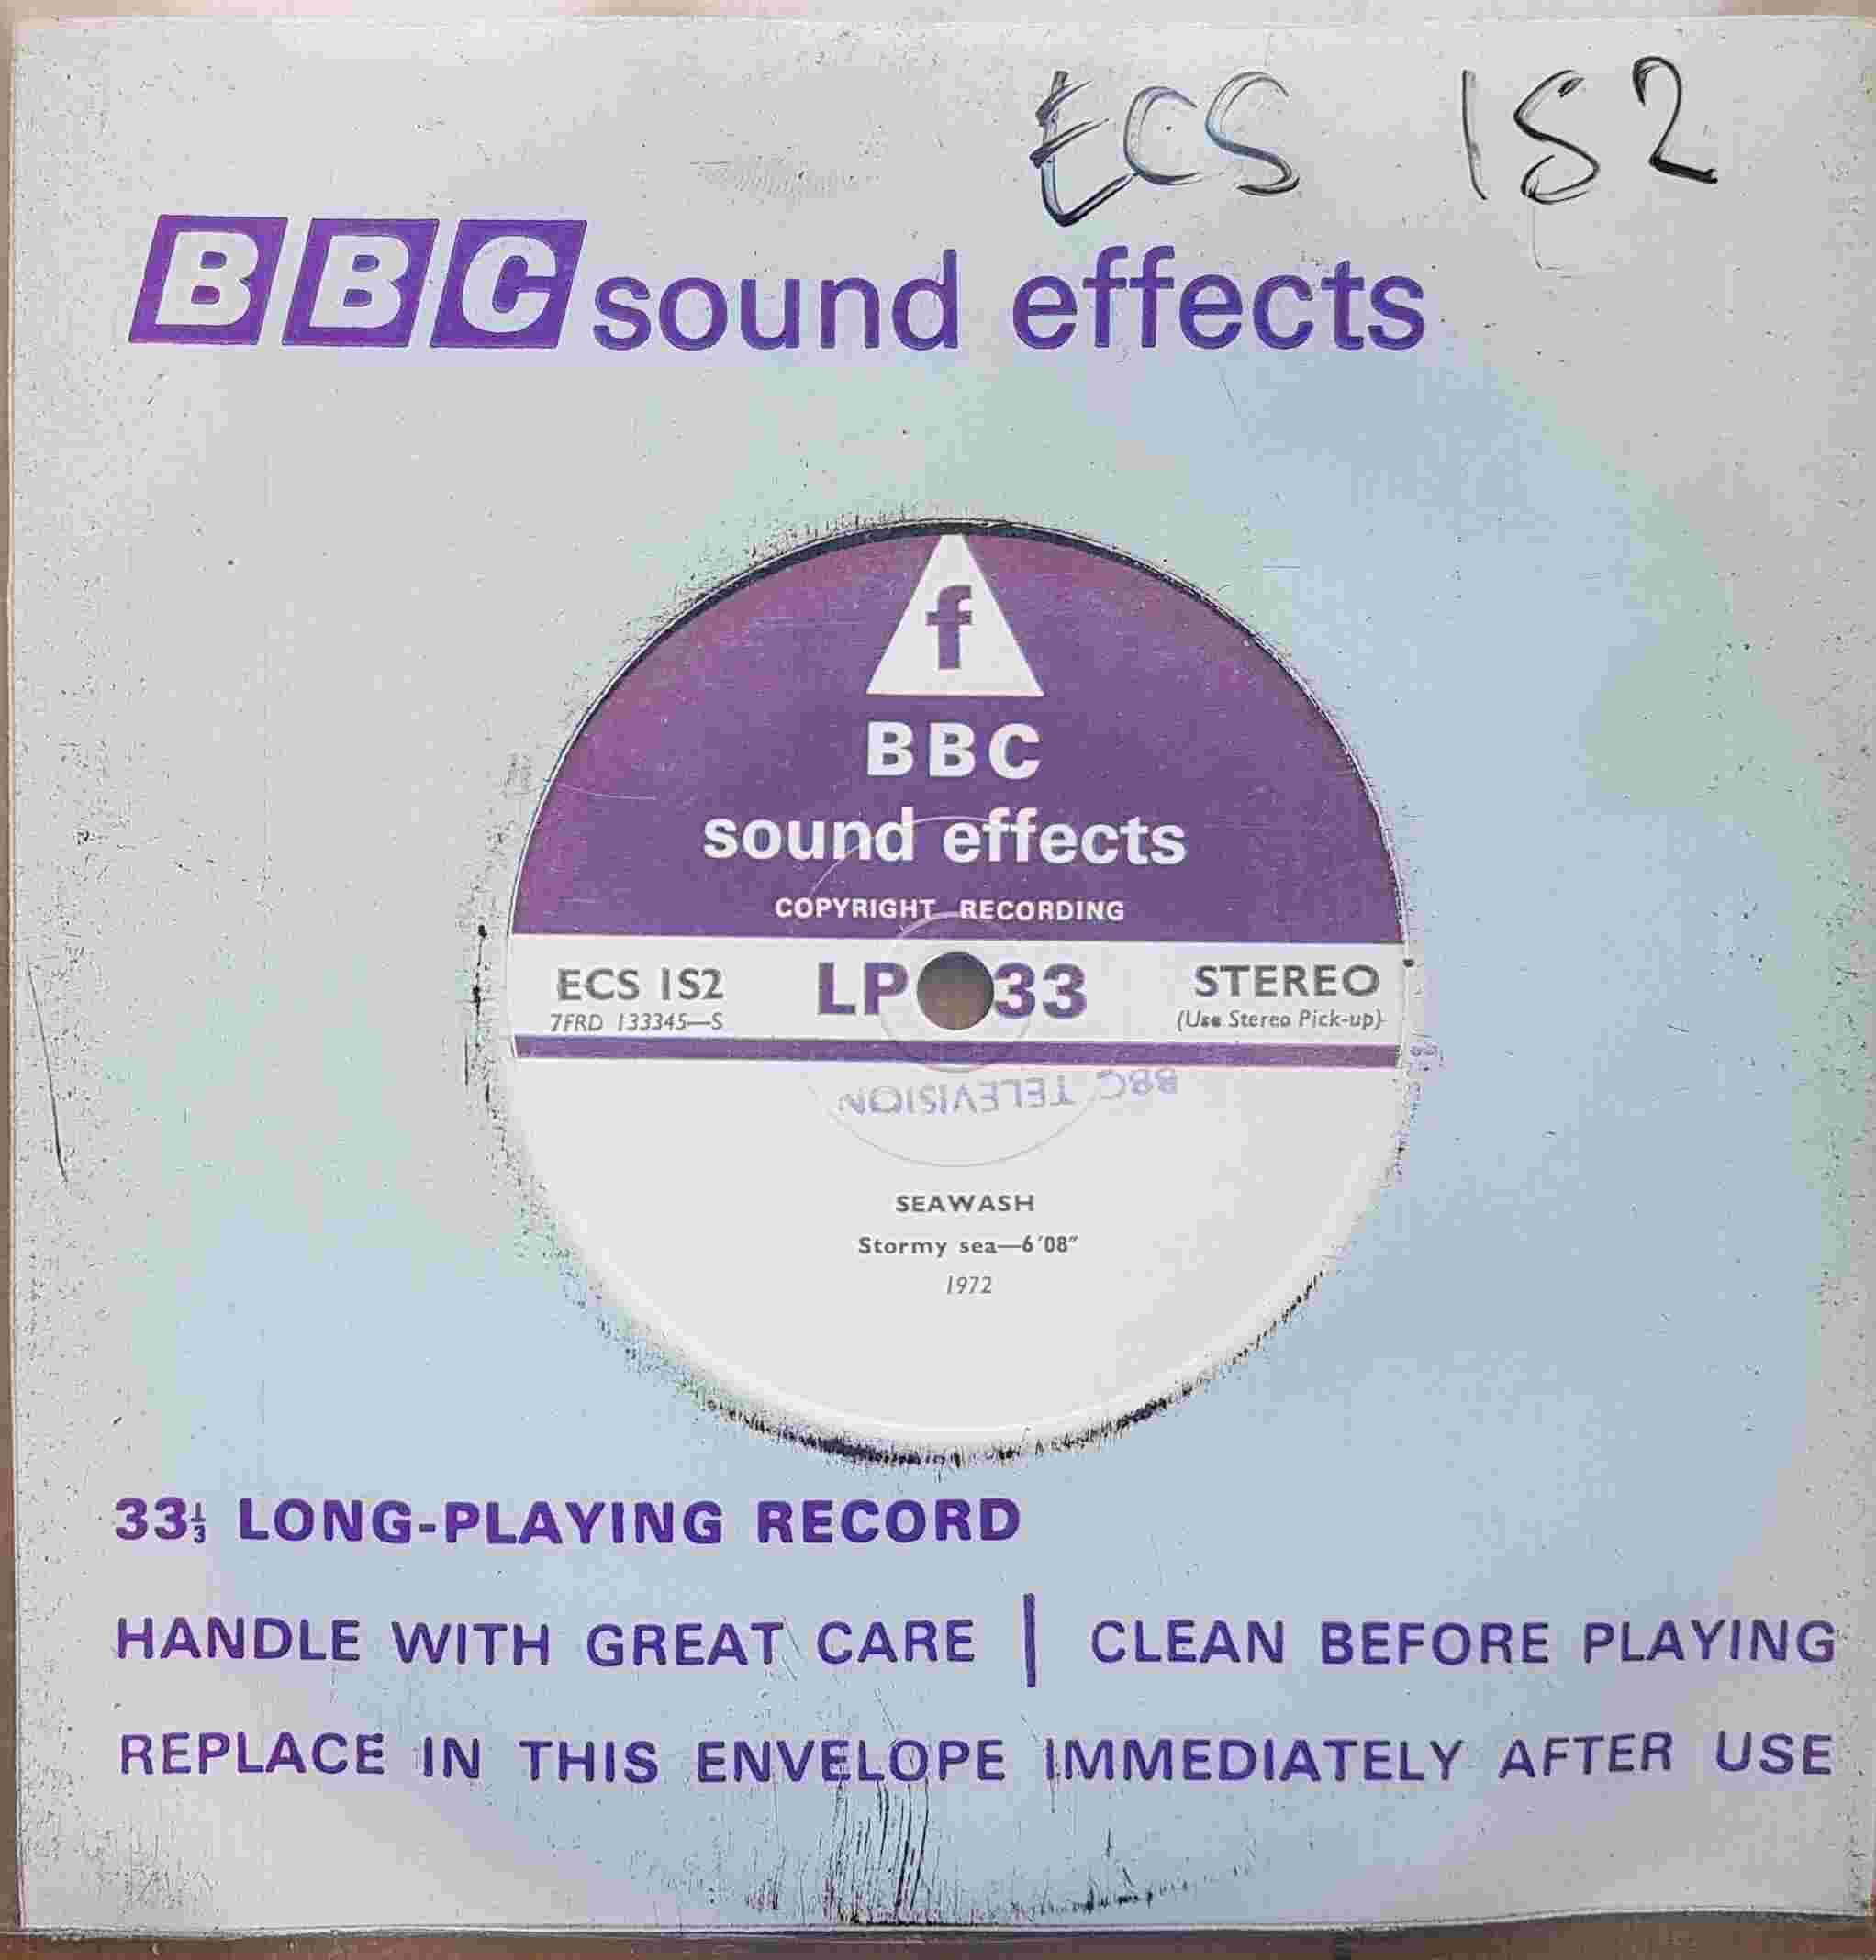 Picture of ECS 1S2 Seawash by artist Not registered from the BBC records and Tapes library